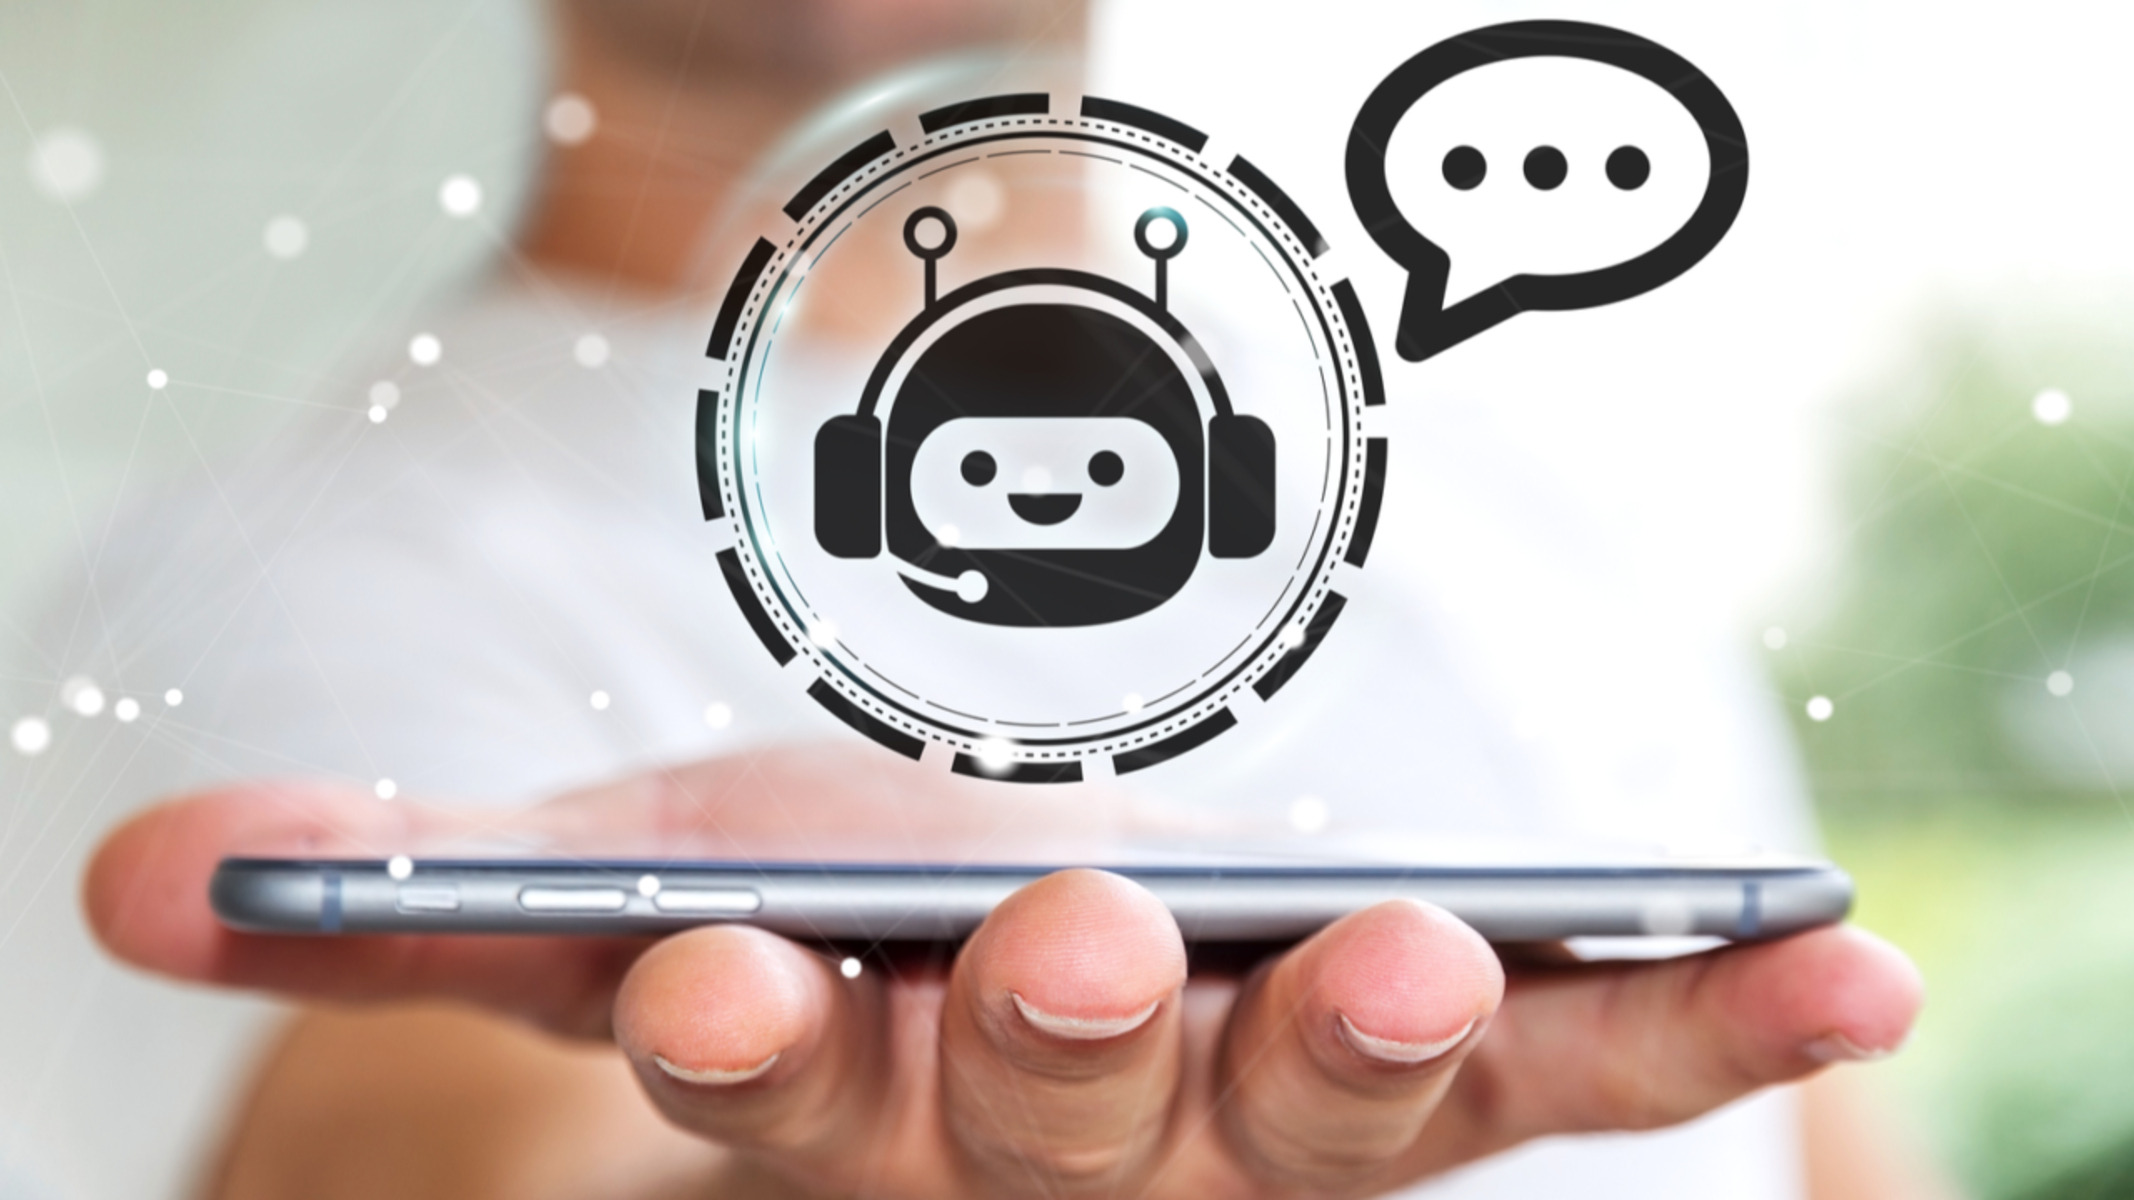 What Are Chatbots Good For